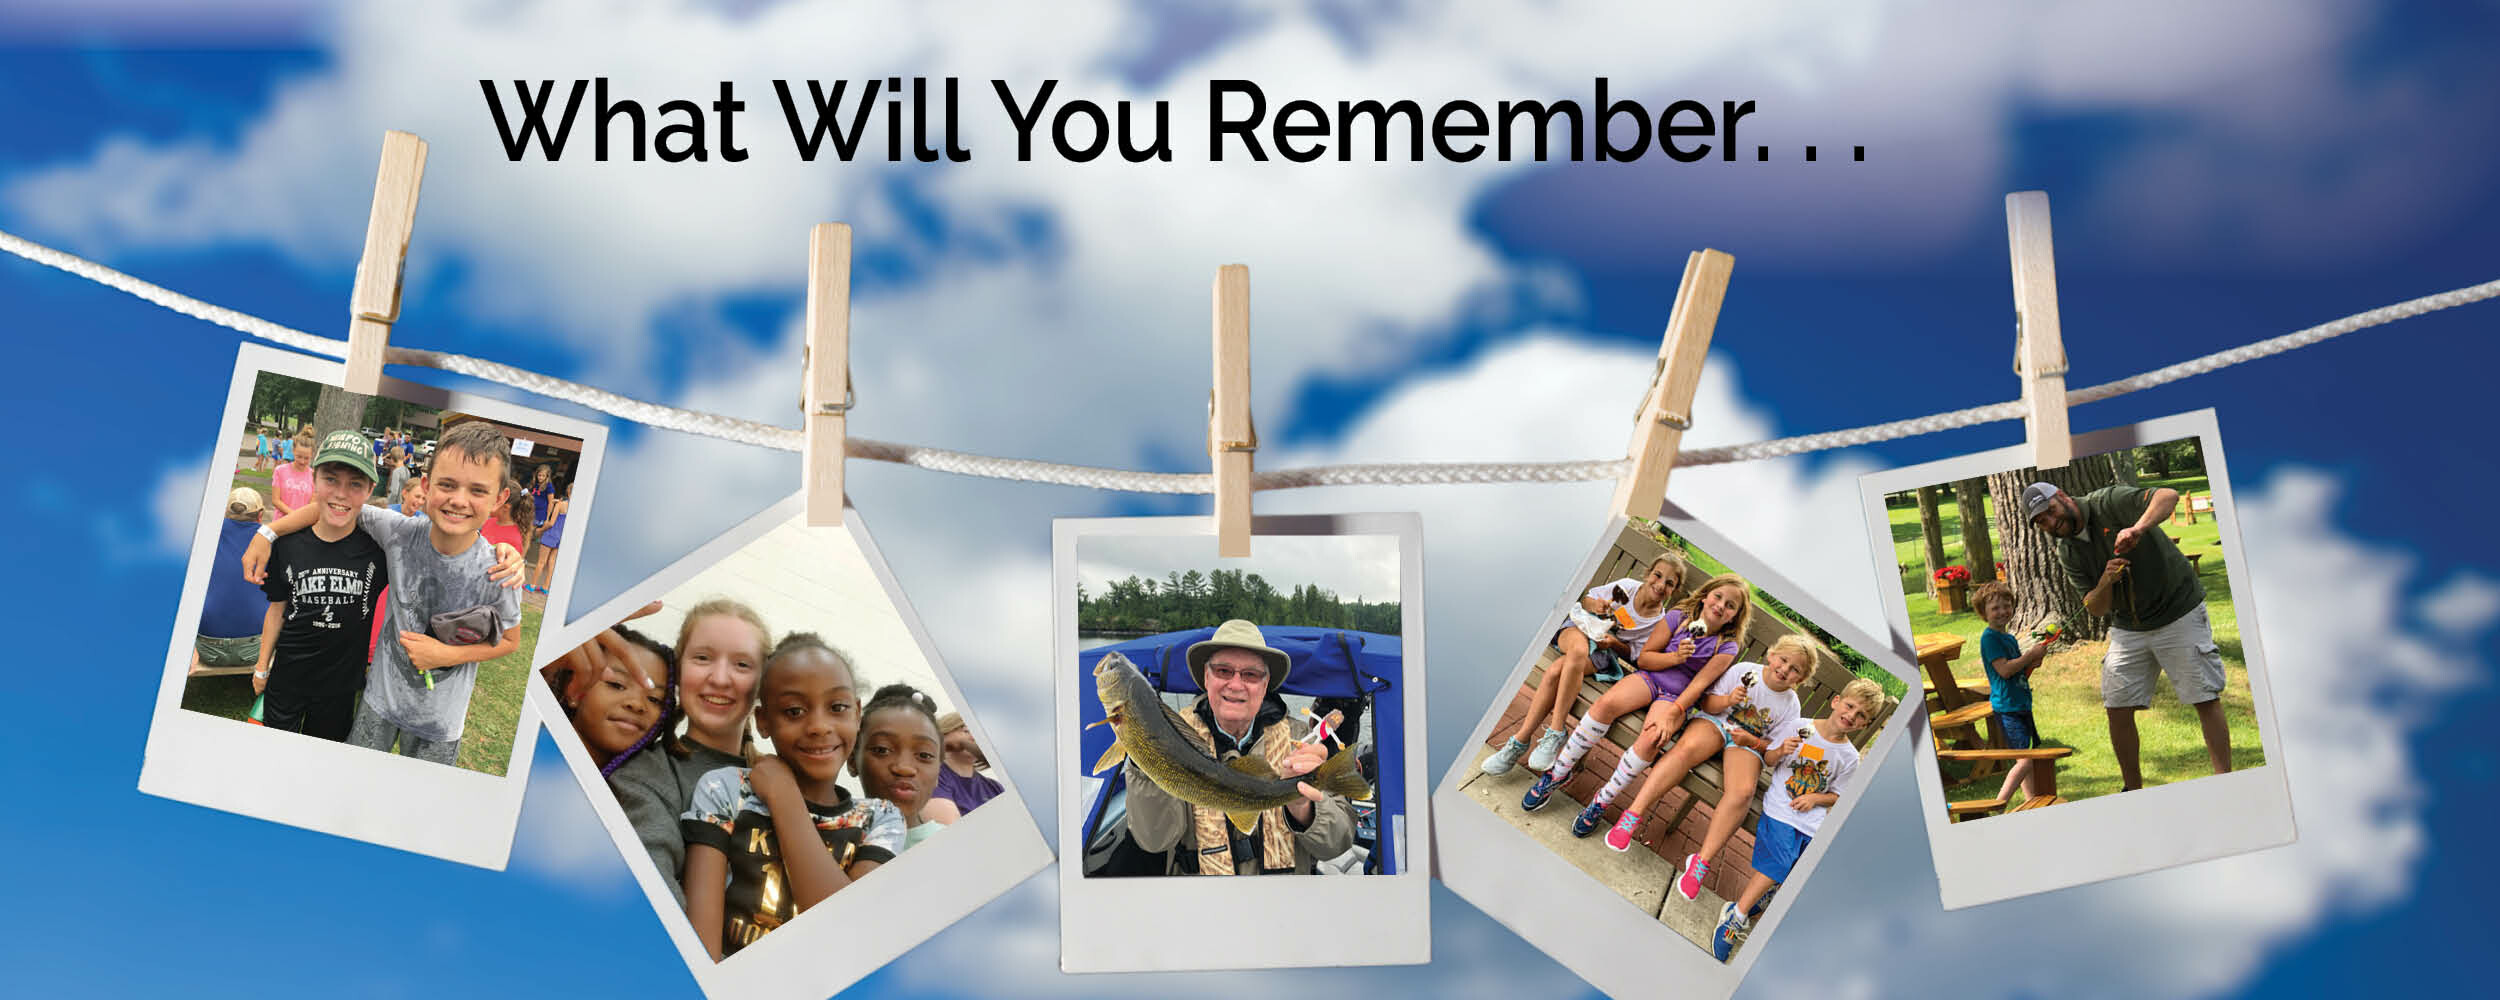 What Will You Remember, Children's Message